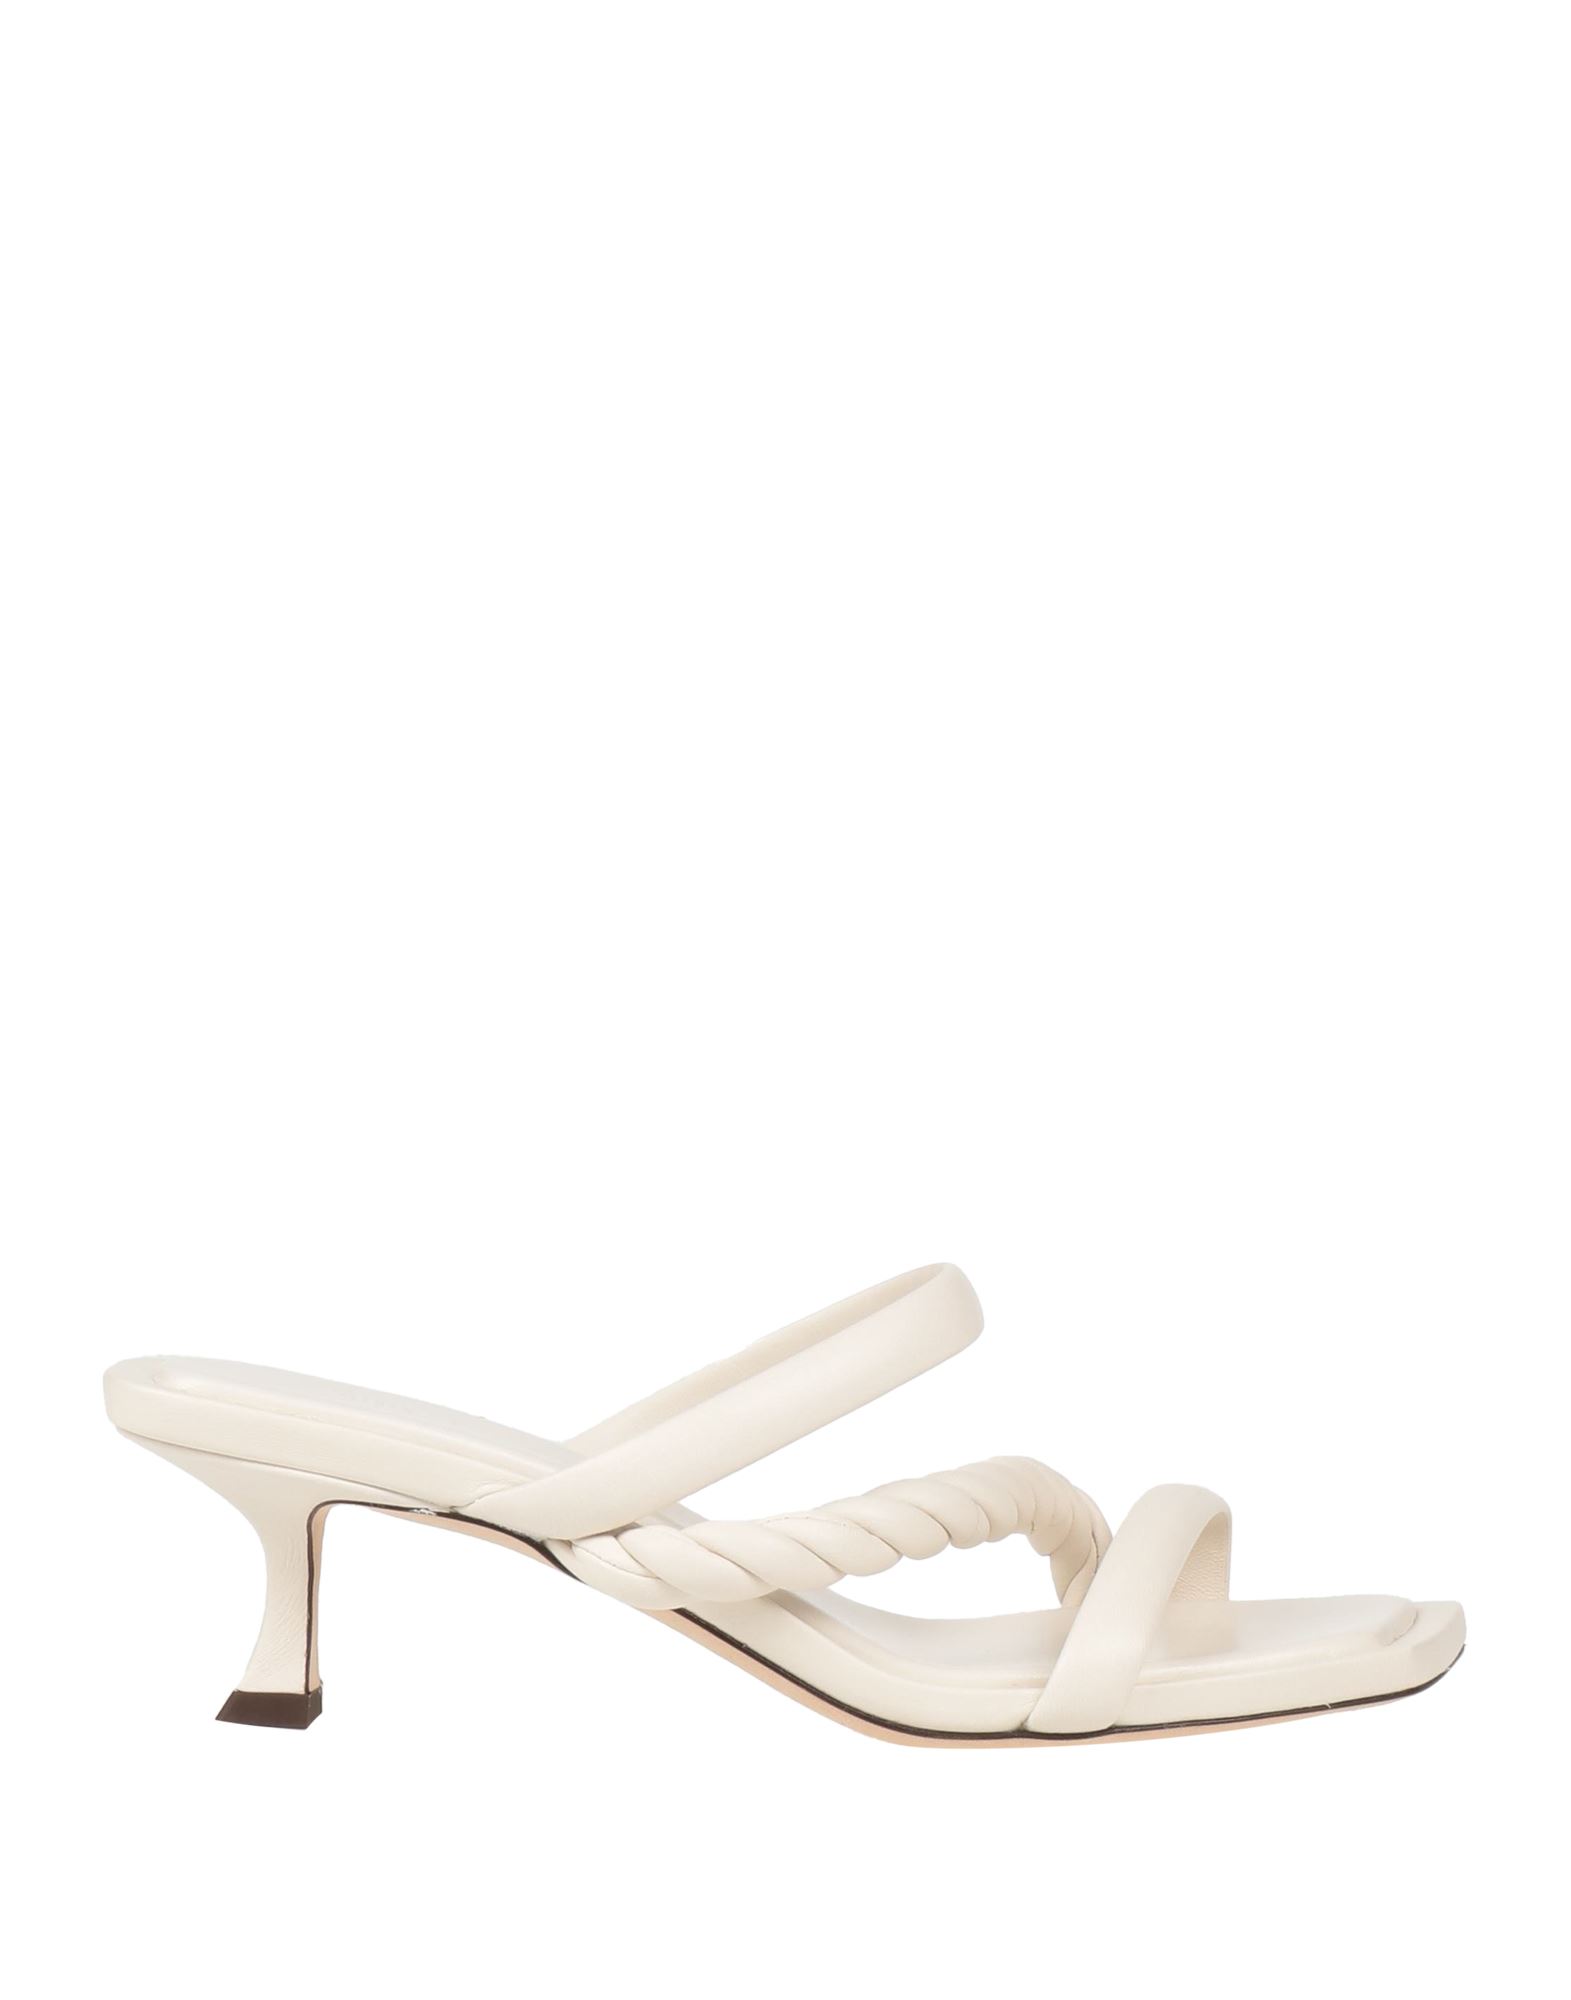 Jimmy Choo Woman Sandals Ivory Size 7.5 Soft Leather In White